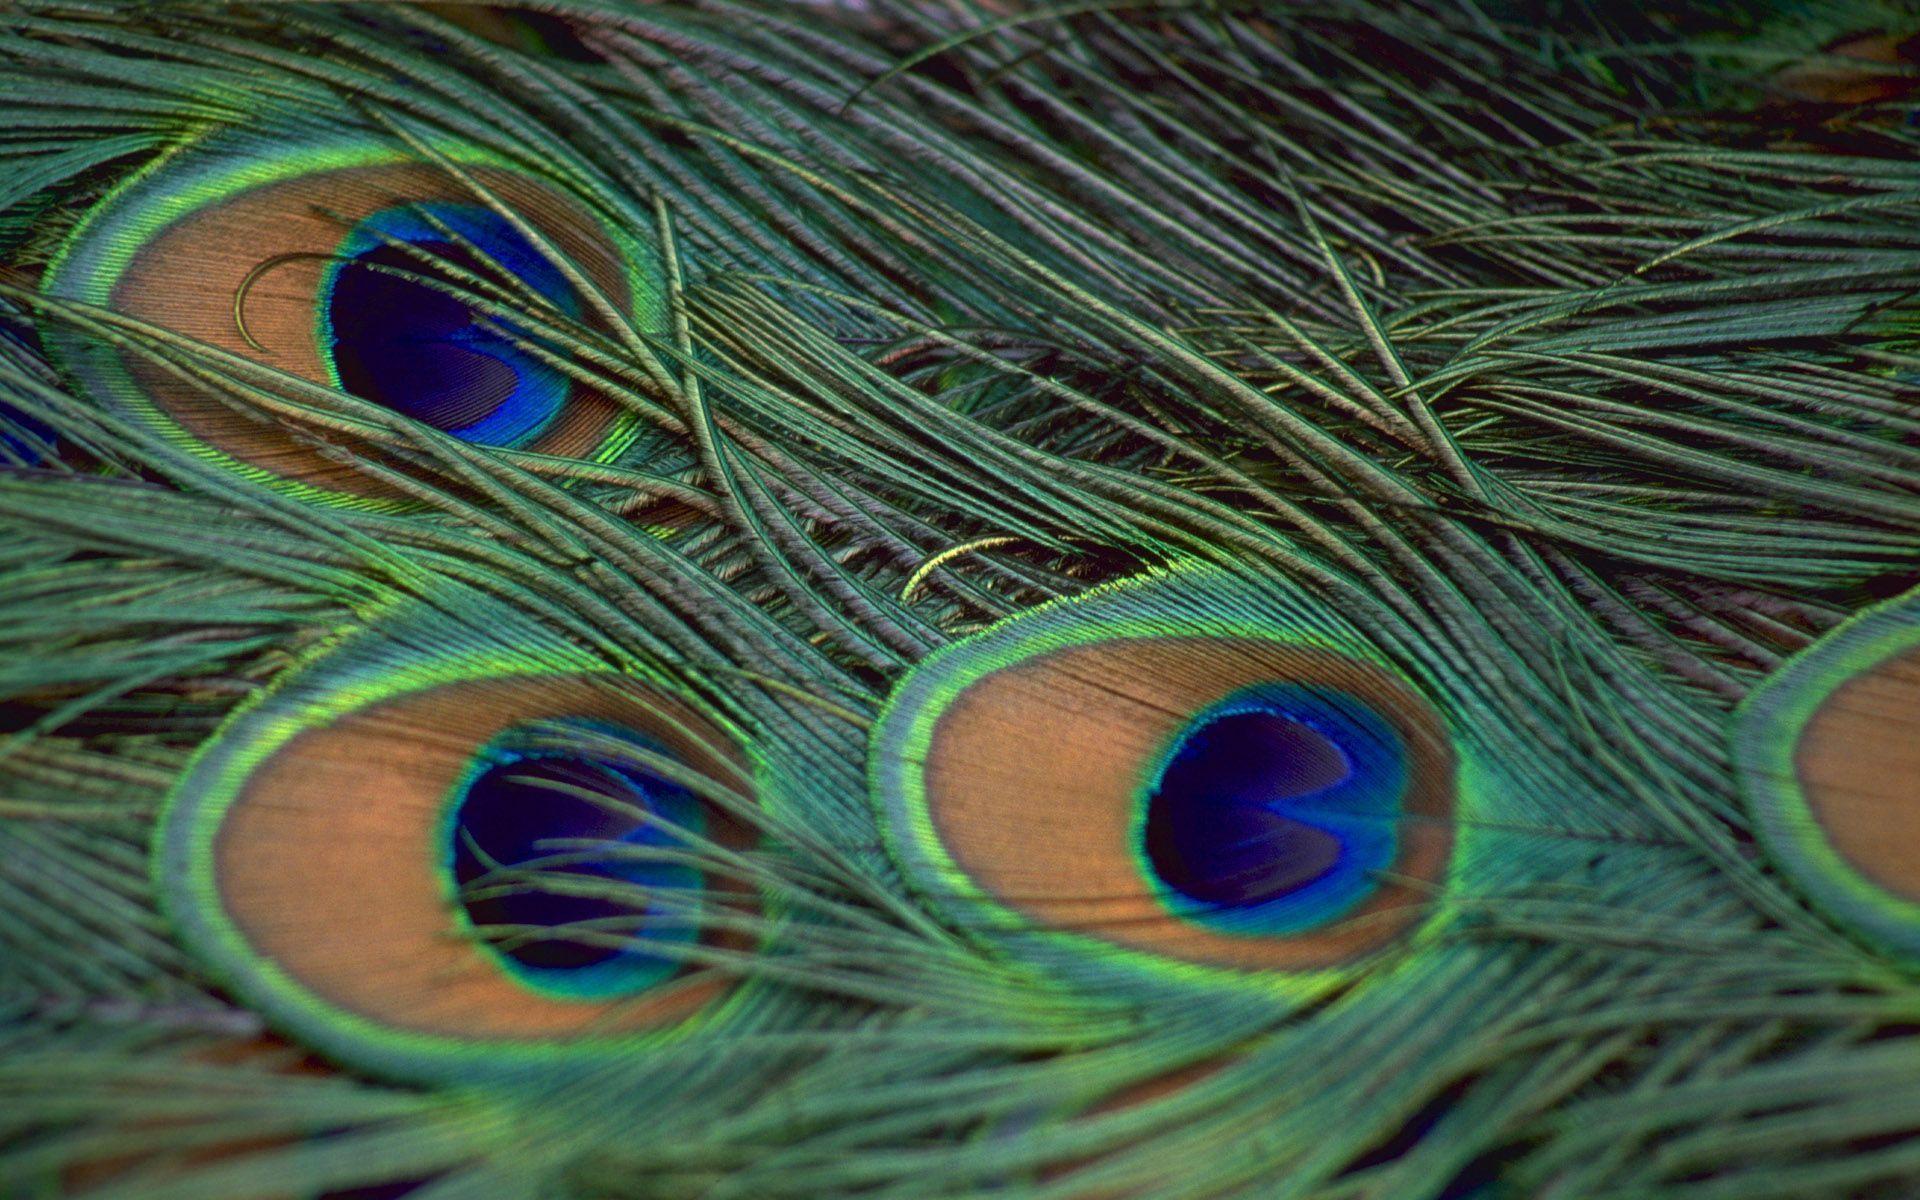 Peacock Feathers wallpaper and image, picture, photo